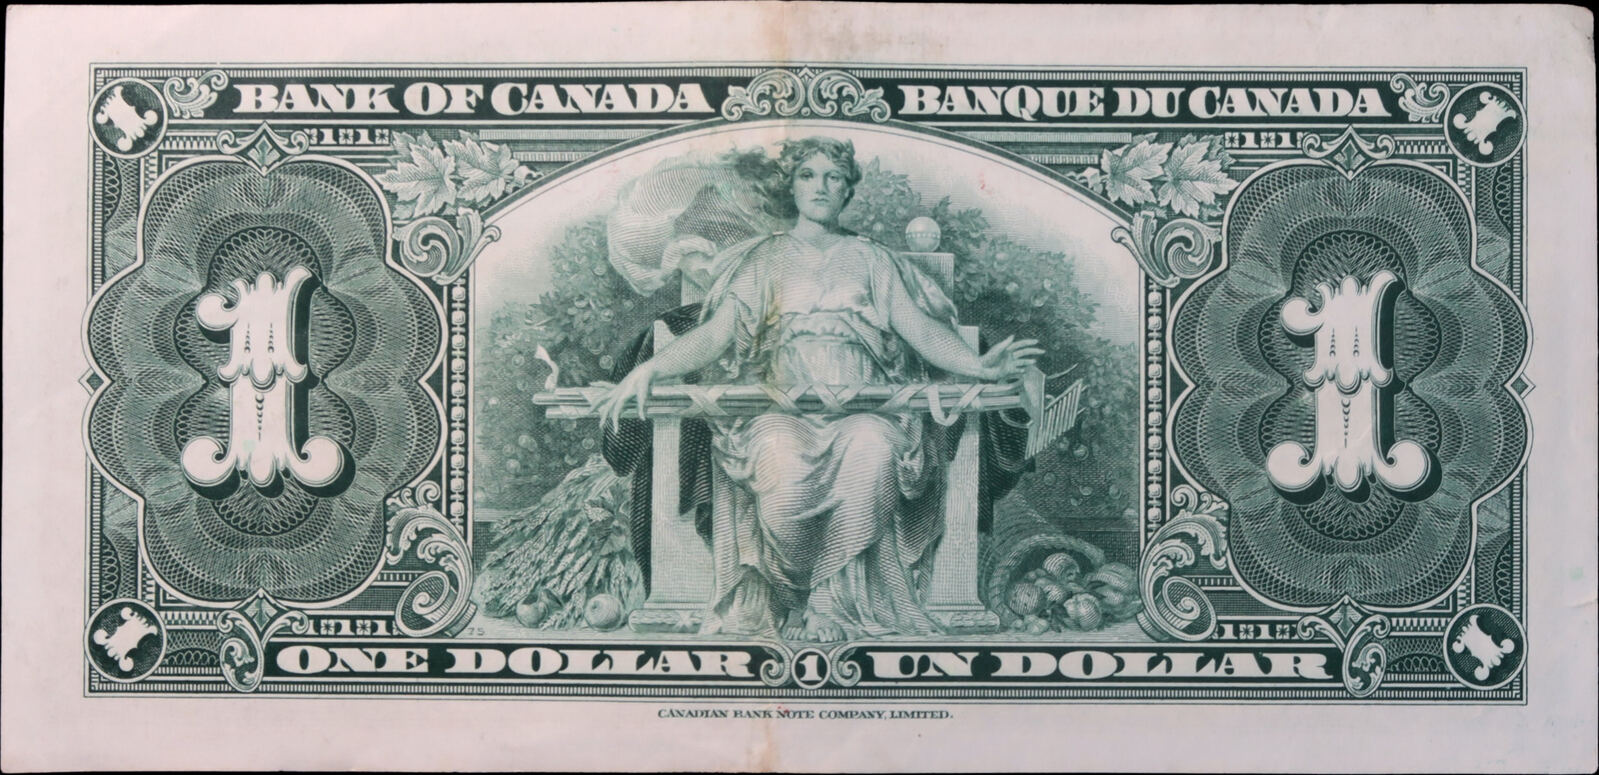 canada 1 dollar 1959-61 world banknote - For Sale, Buy Now Online - Item  #734113